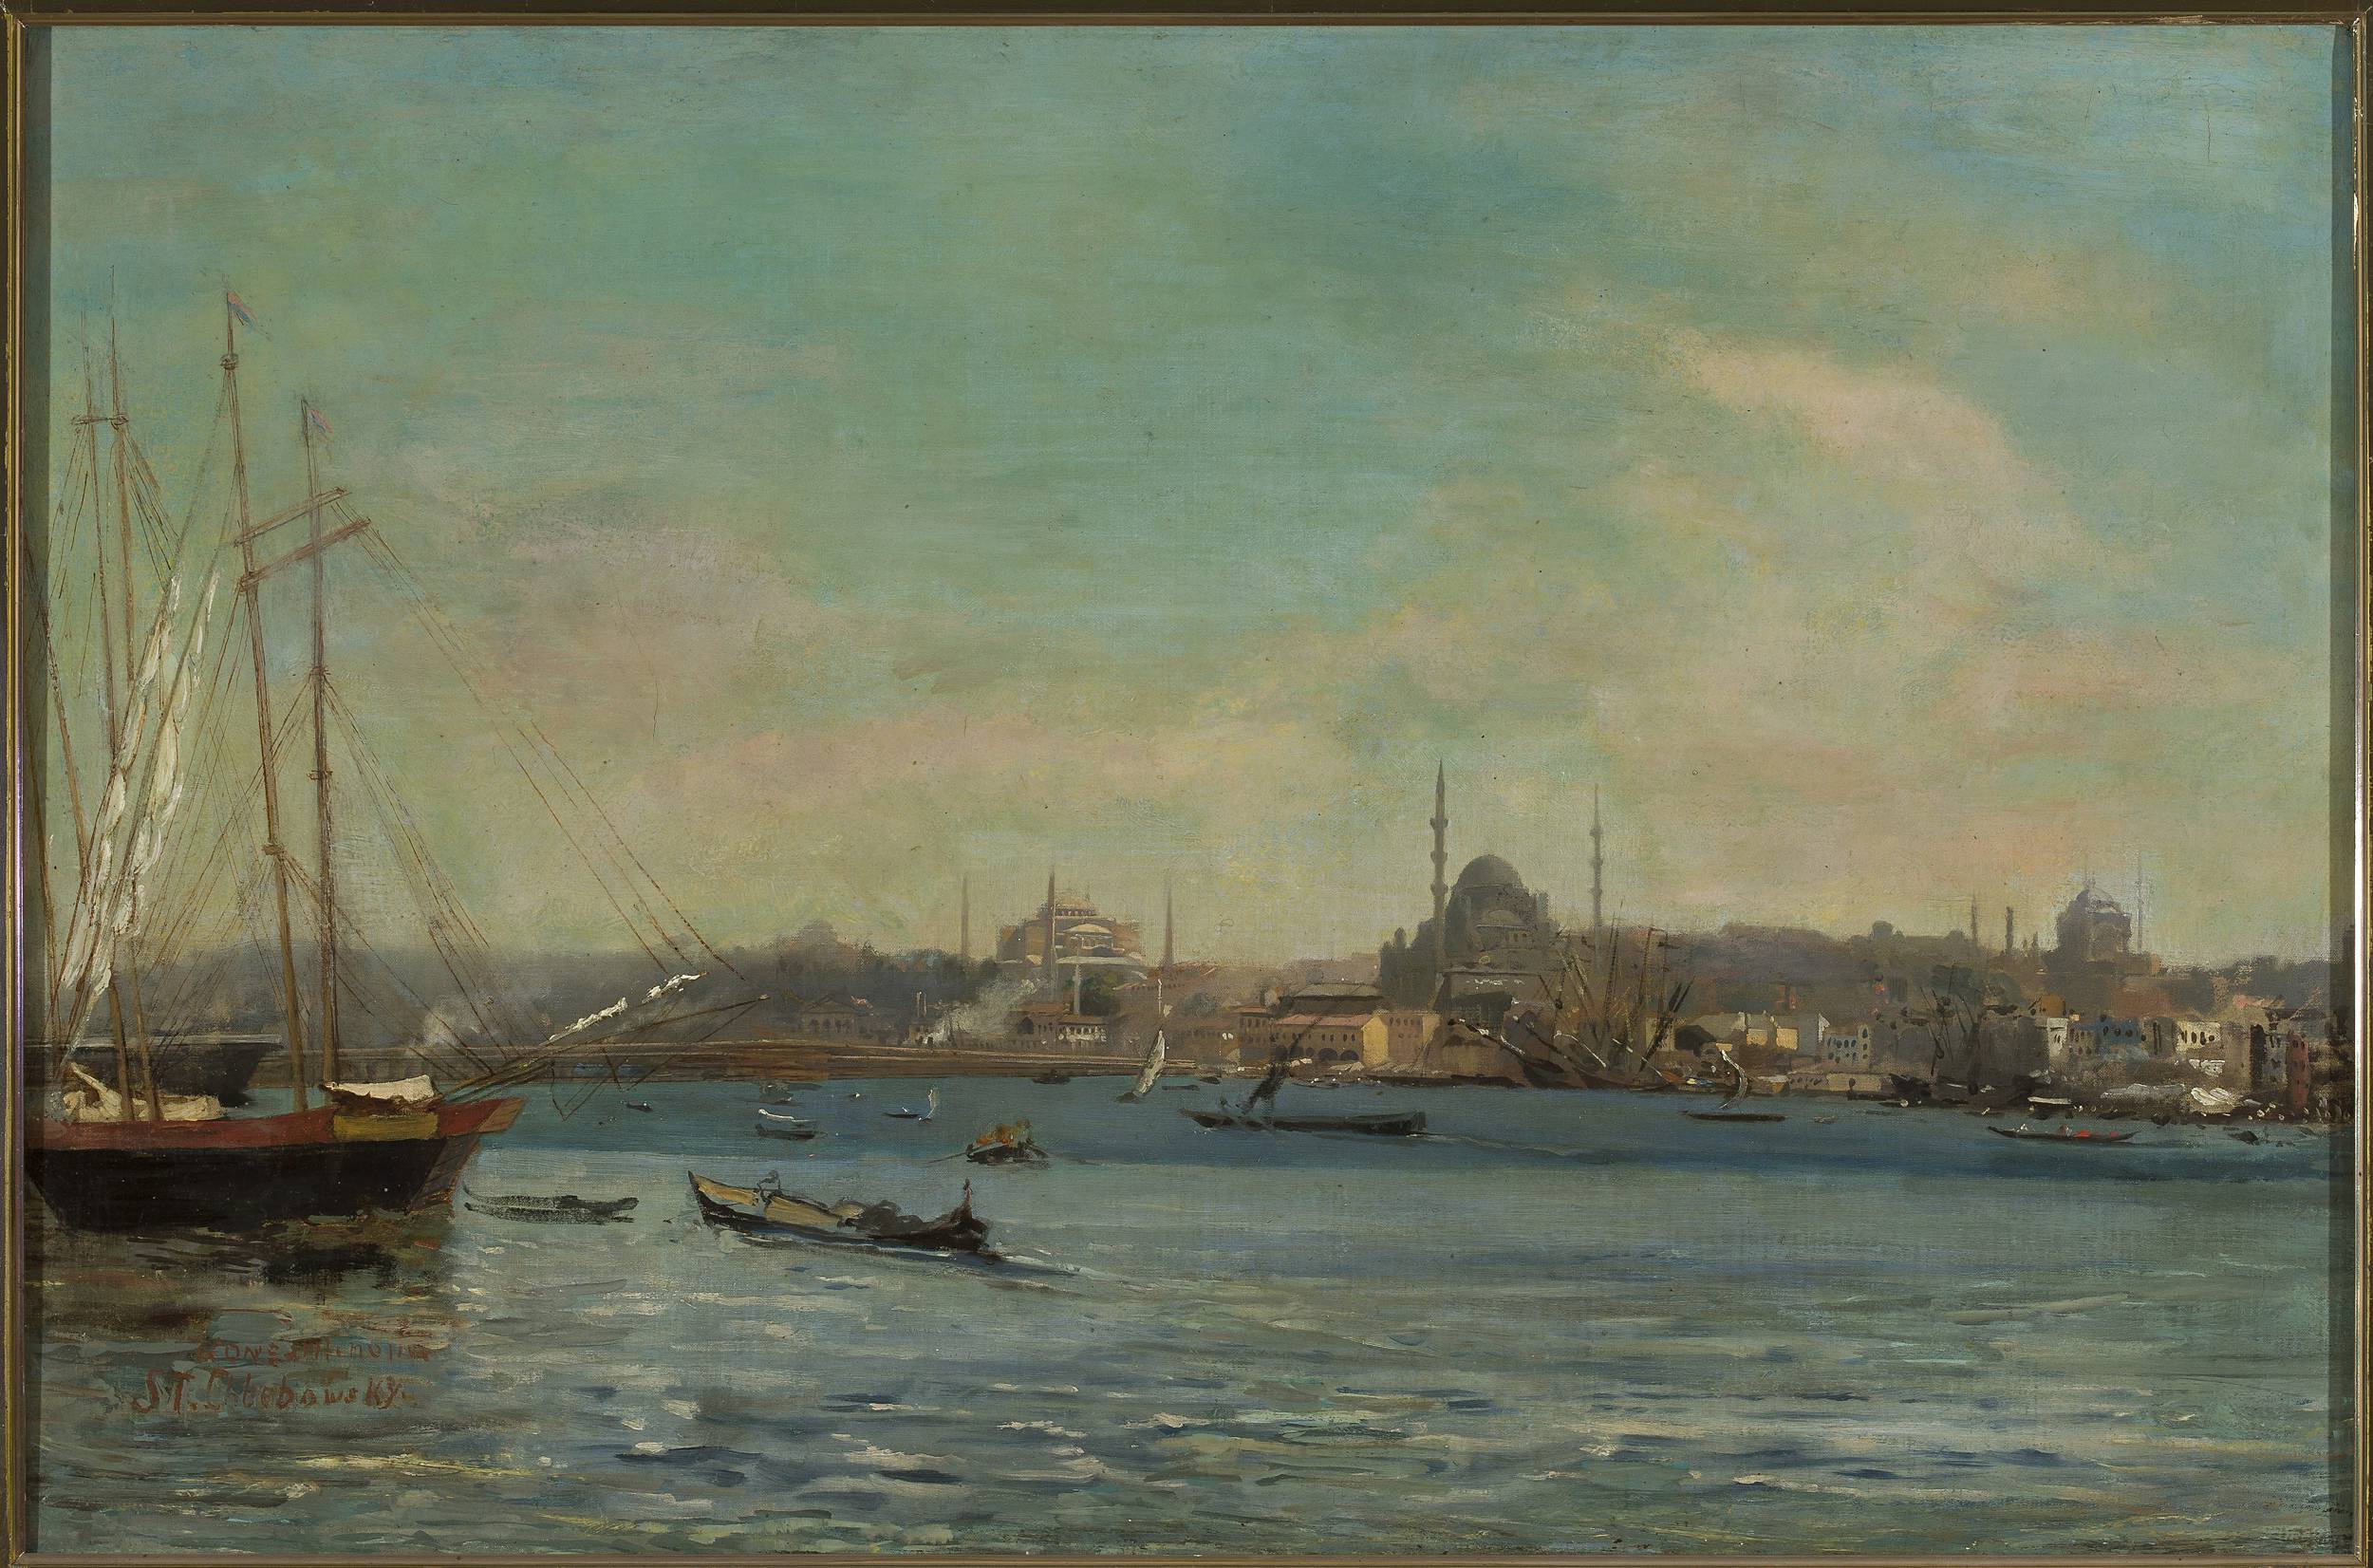 A landscape view of ships and boats along a city's harbour